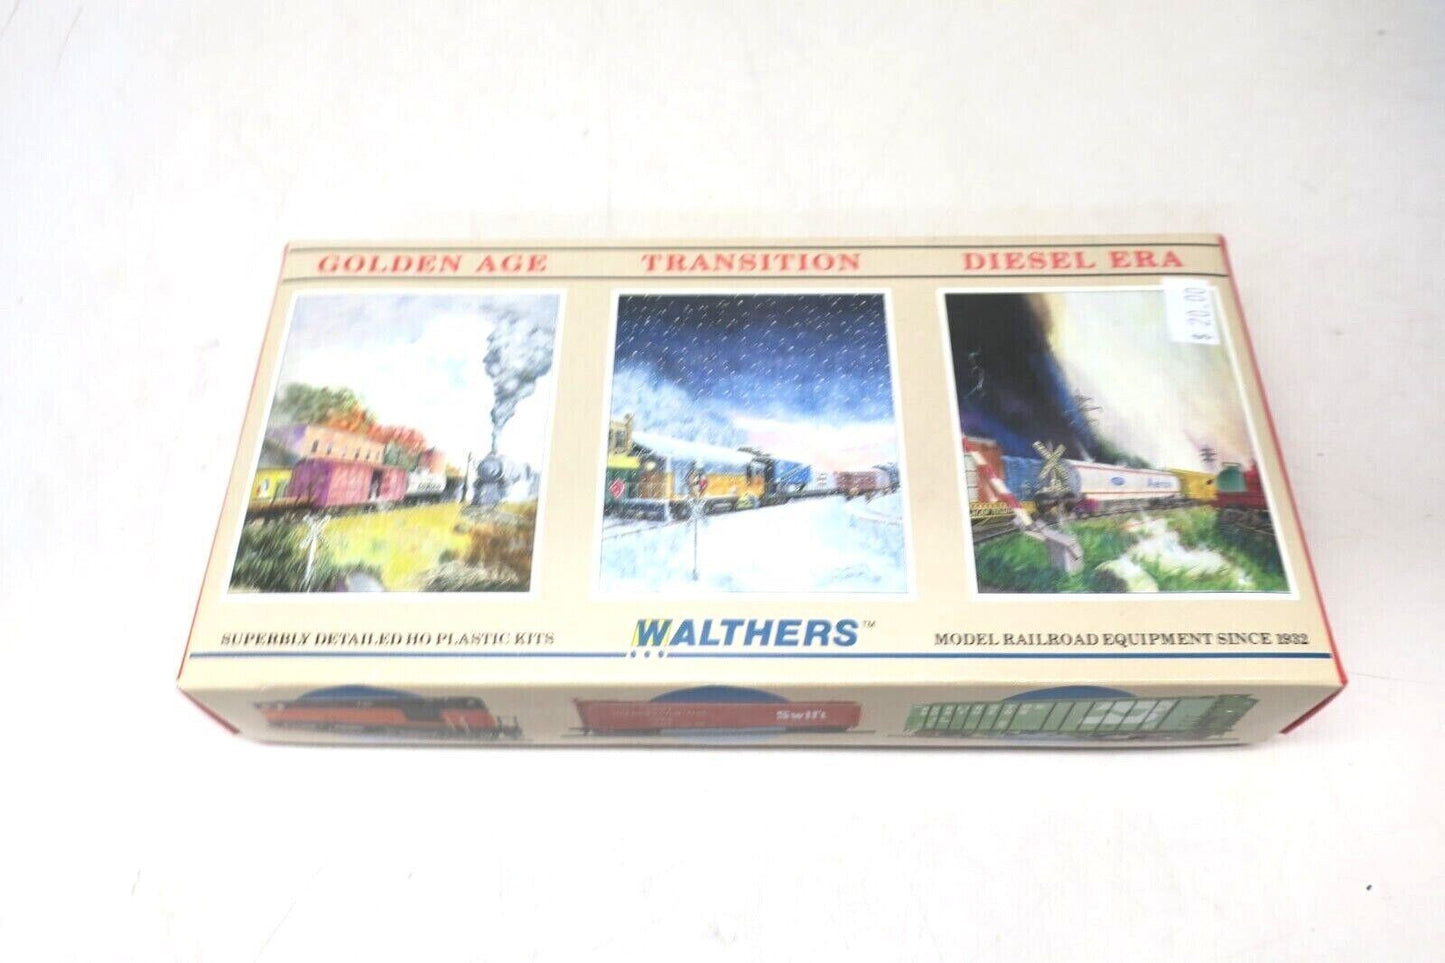 Walthers PS-2CD2 4427 Covered Hopper Chicago North Western Kit # 96401 932-5703